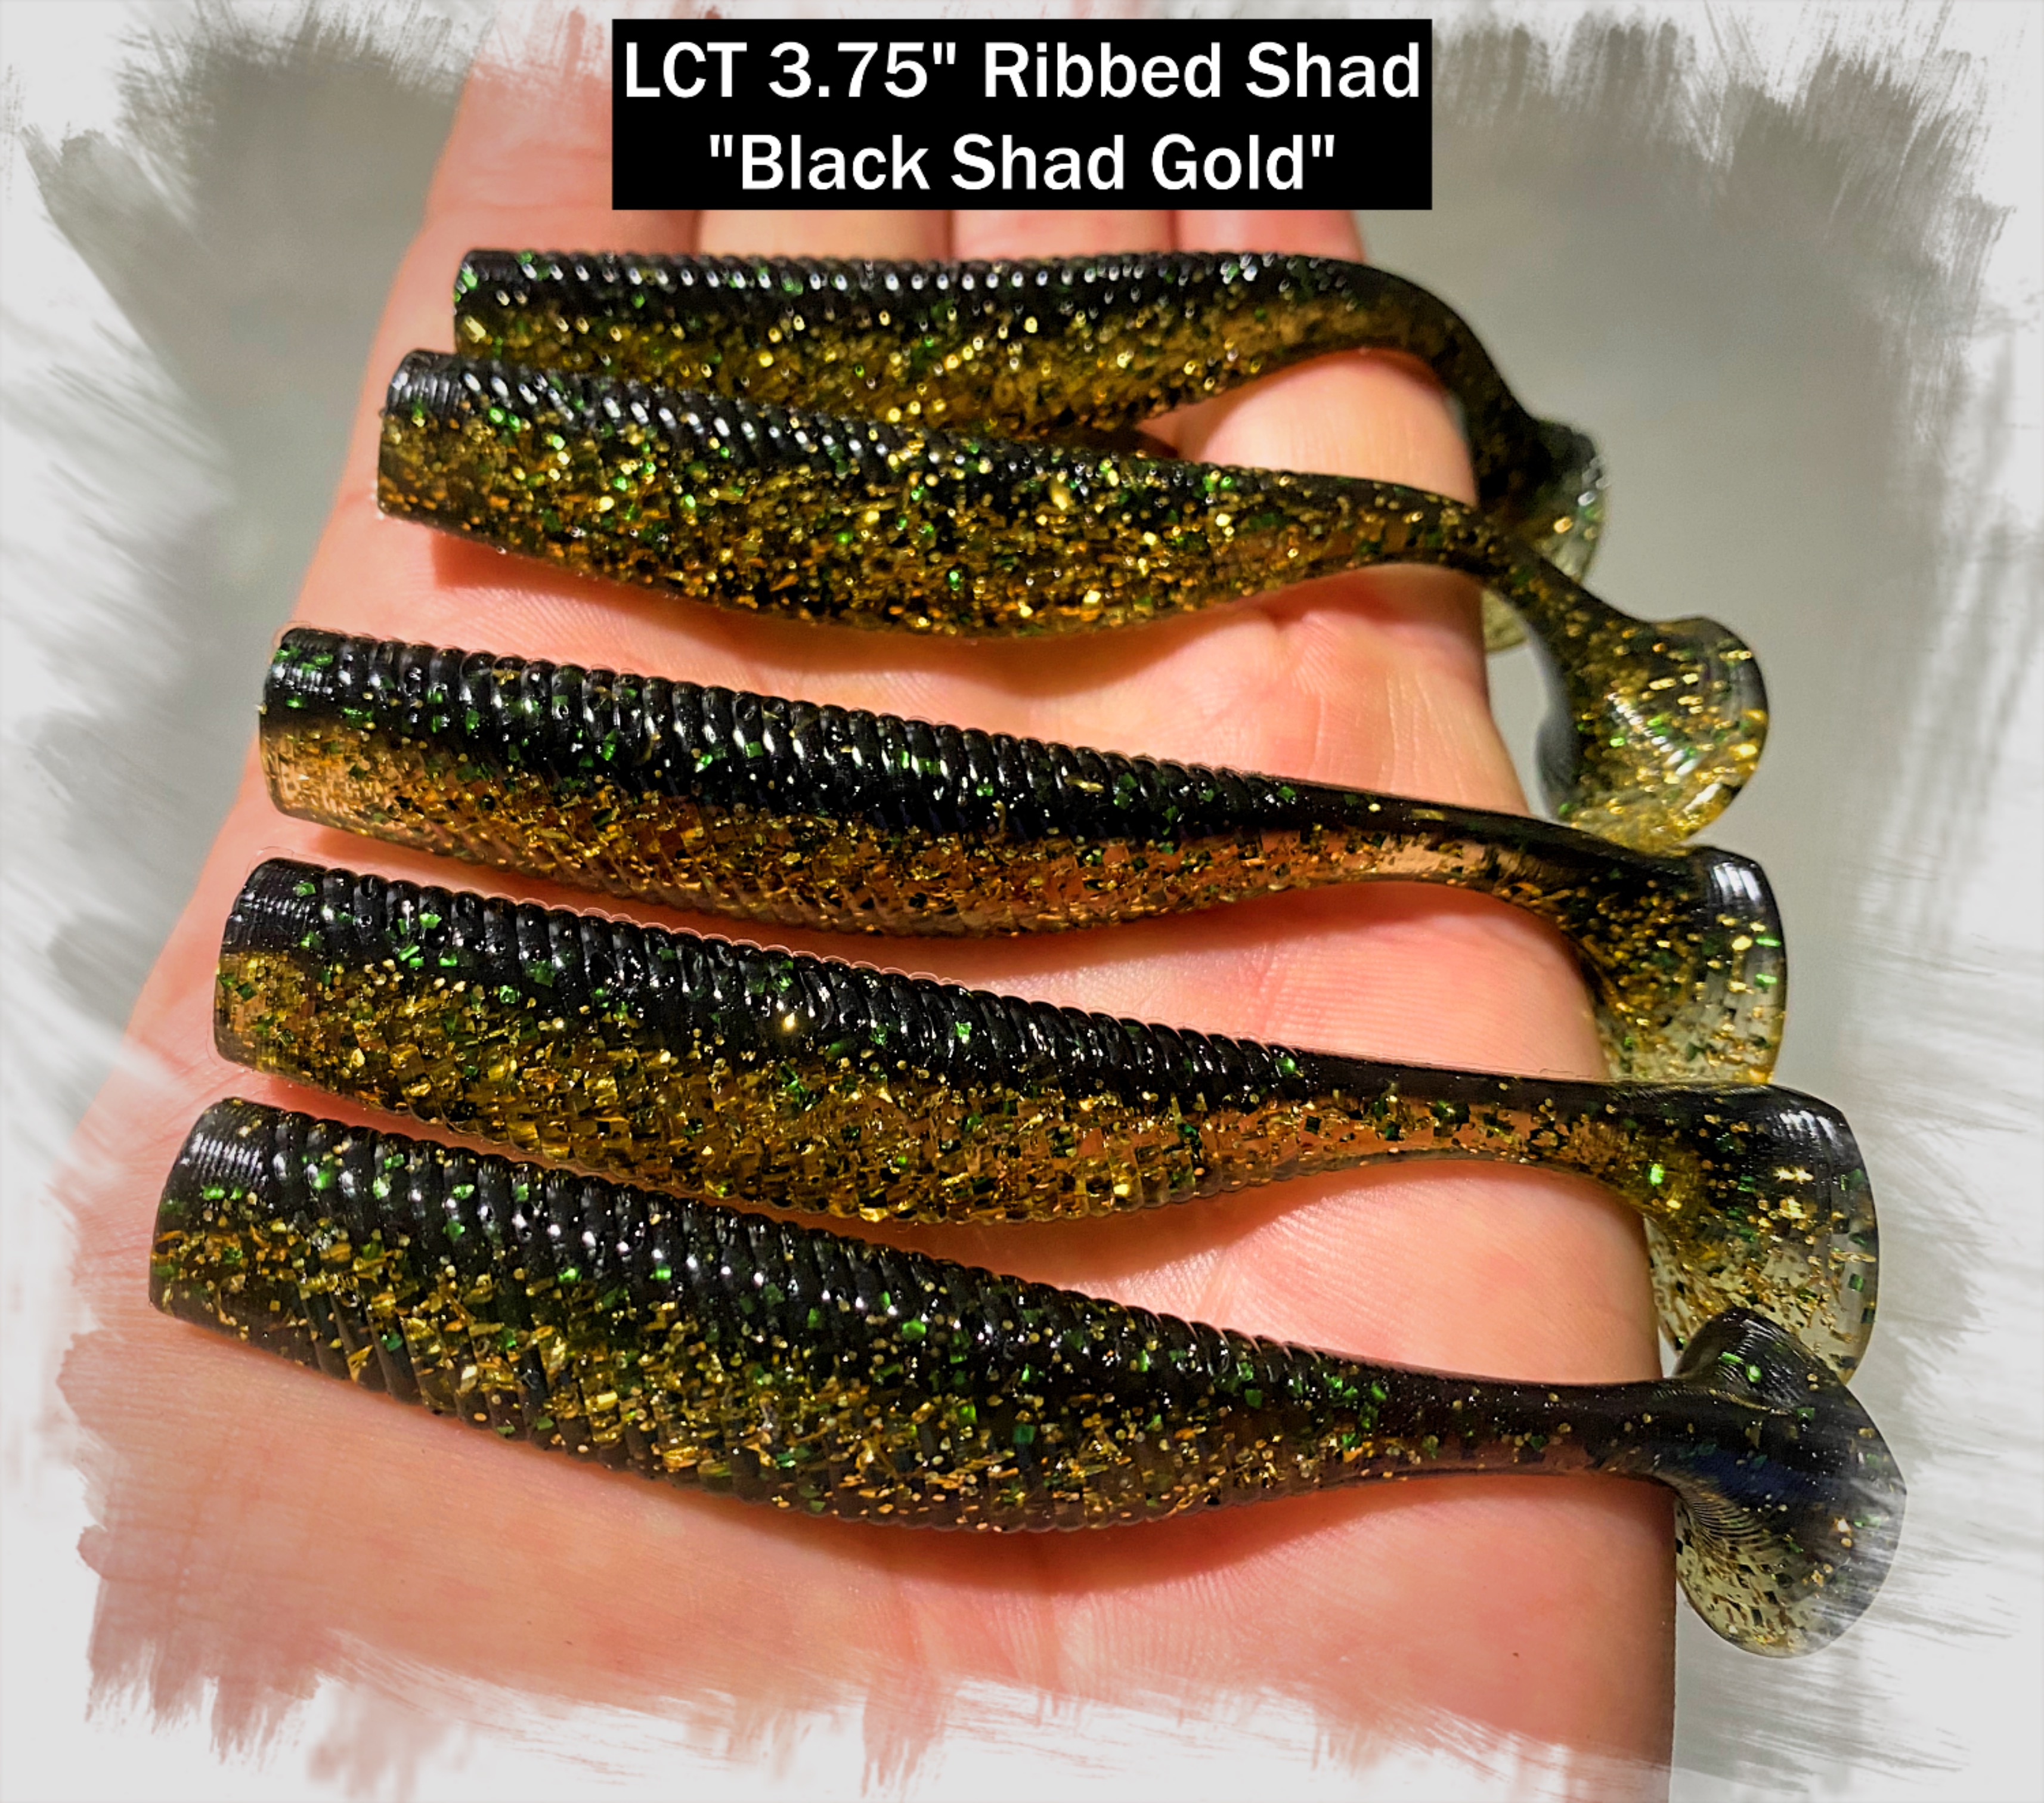 LCT 3.75 Hammer Shad (5 Pack) Red Eyed Ghost Shad